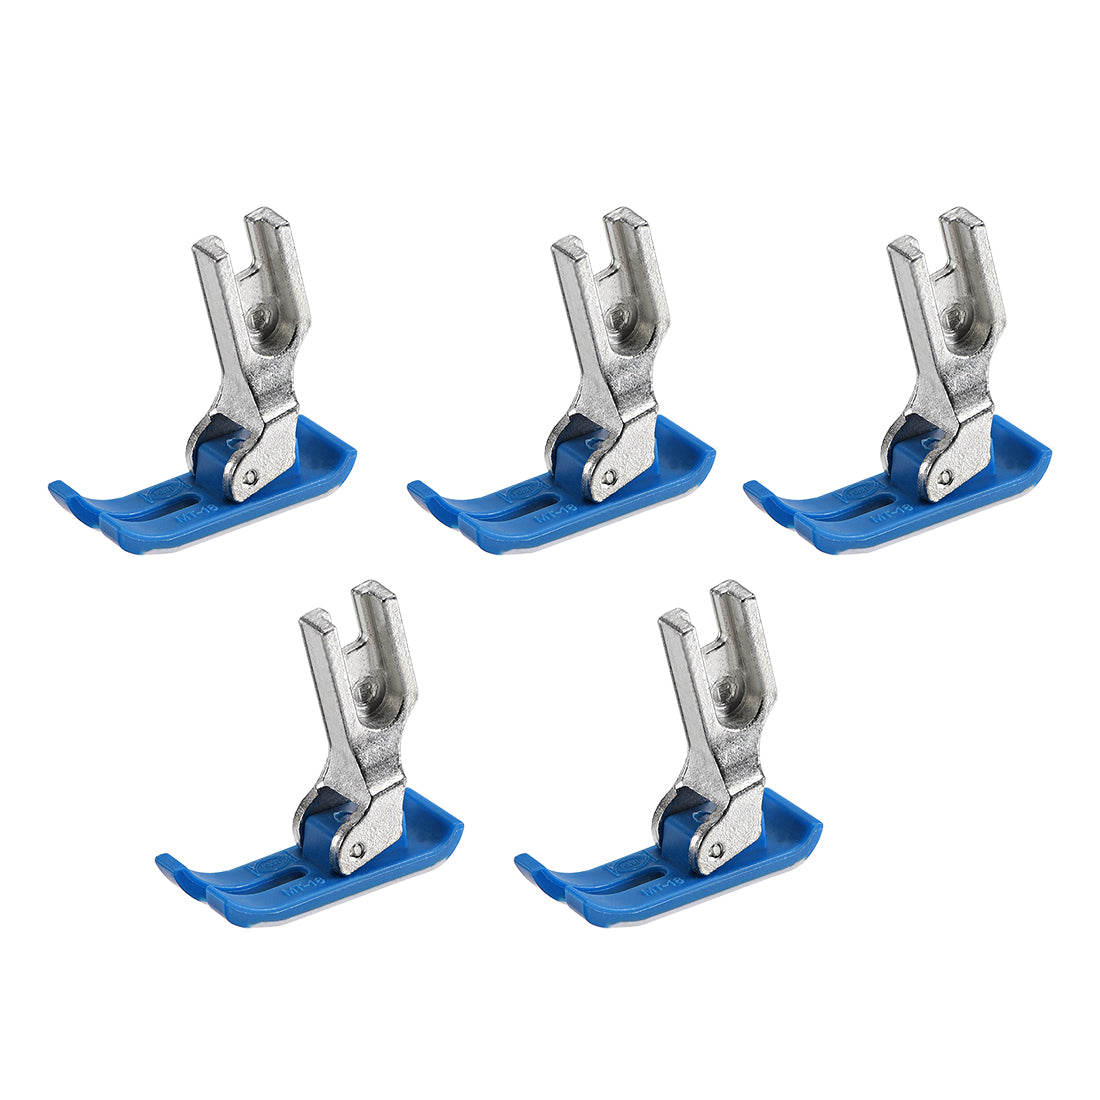 uxcell Uxcell MT-18 Industrial Sewing Machines Extra Thin Precise Presser Foot Blue 5pcs